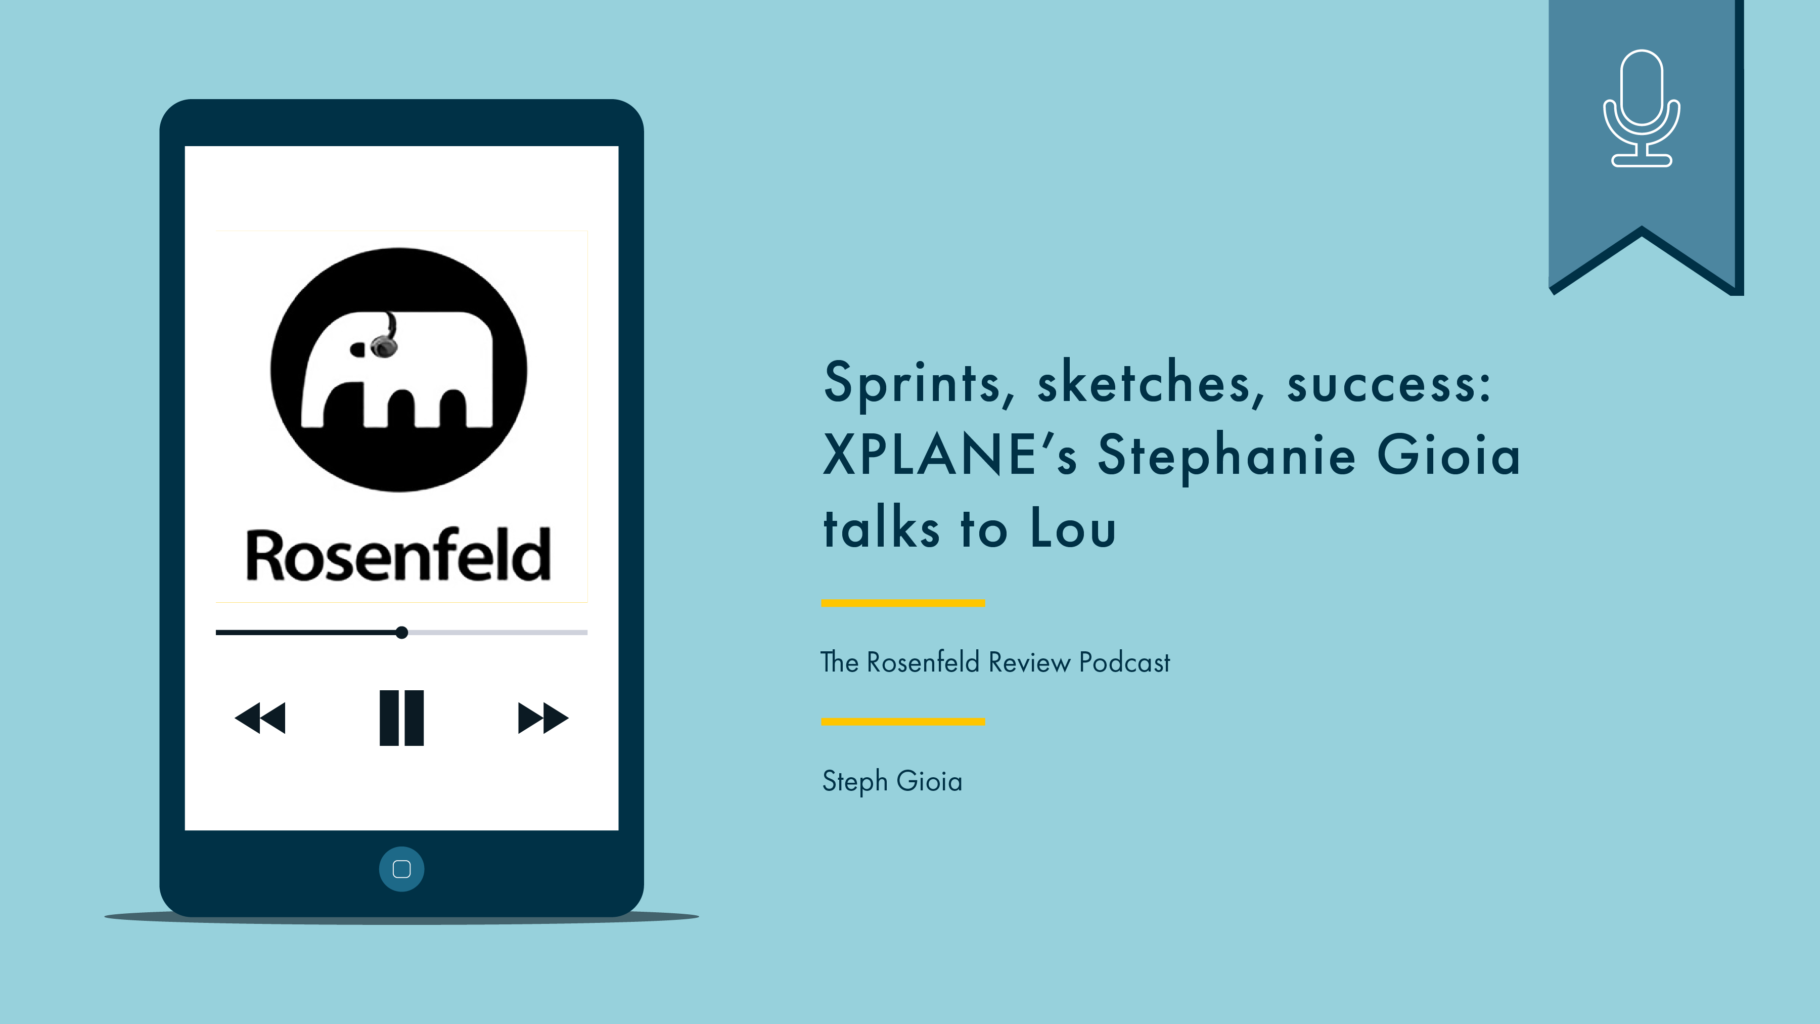 Phone with podcast artwork on the left. On the right reads “Sprints, sketches, success: XPLANE’s Stephanie Gioia talks to Lou, The Rosenfeld Review Podcast, Steph Gioia.” Above is a blue flag with a white icon denoting that this is a podcast.